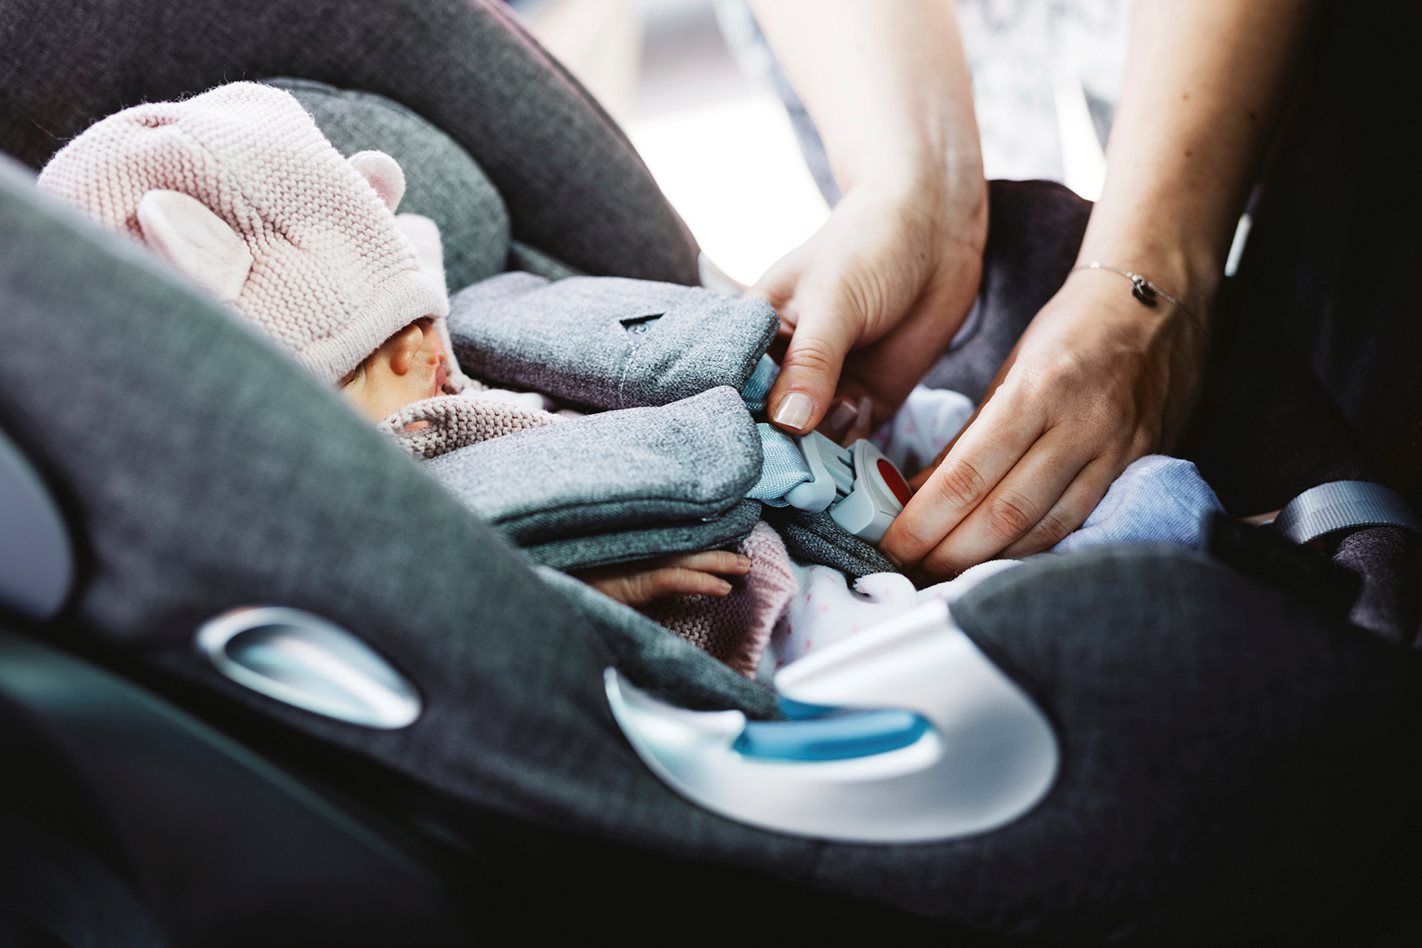 How to prepare your car for a baby